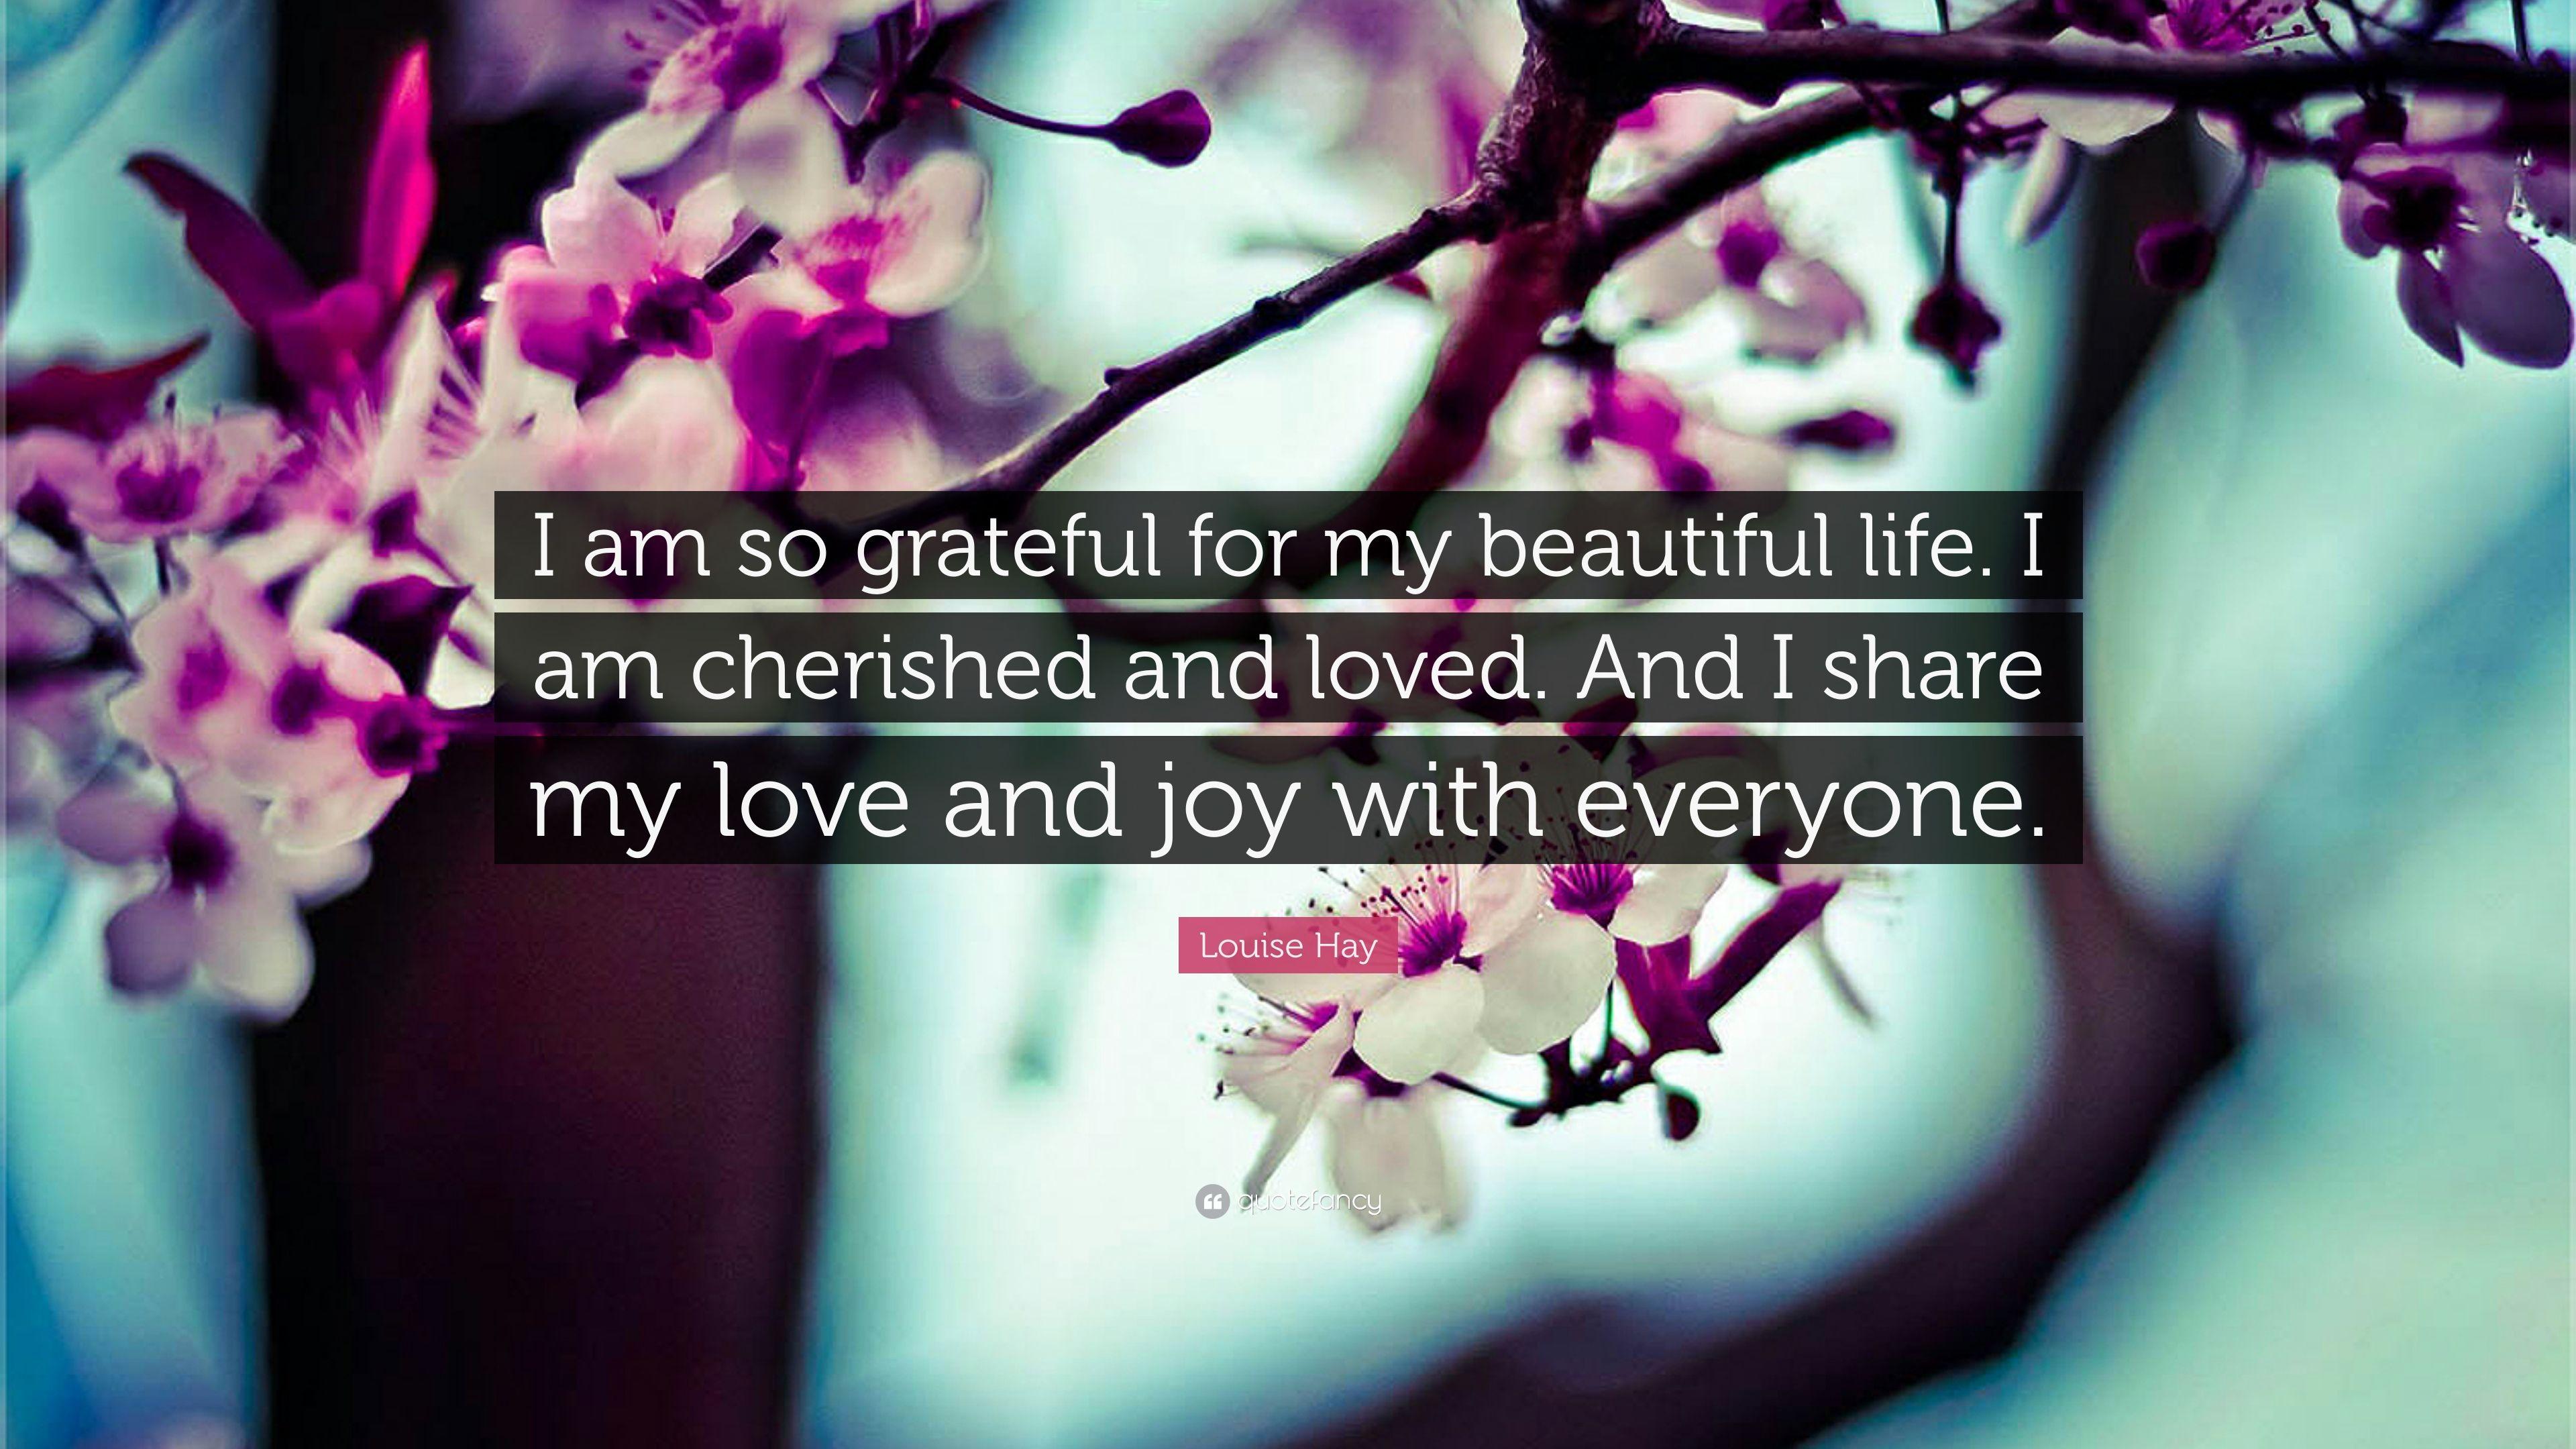 Louise Hay Quote: “I am so grateful for my beautiful life. I am